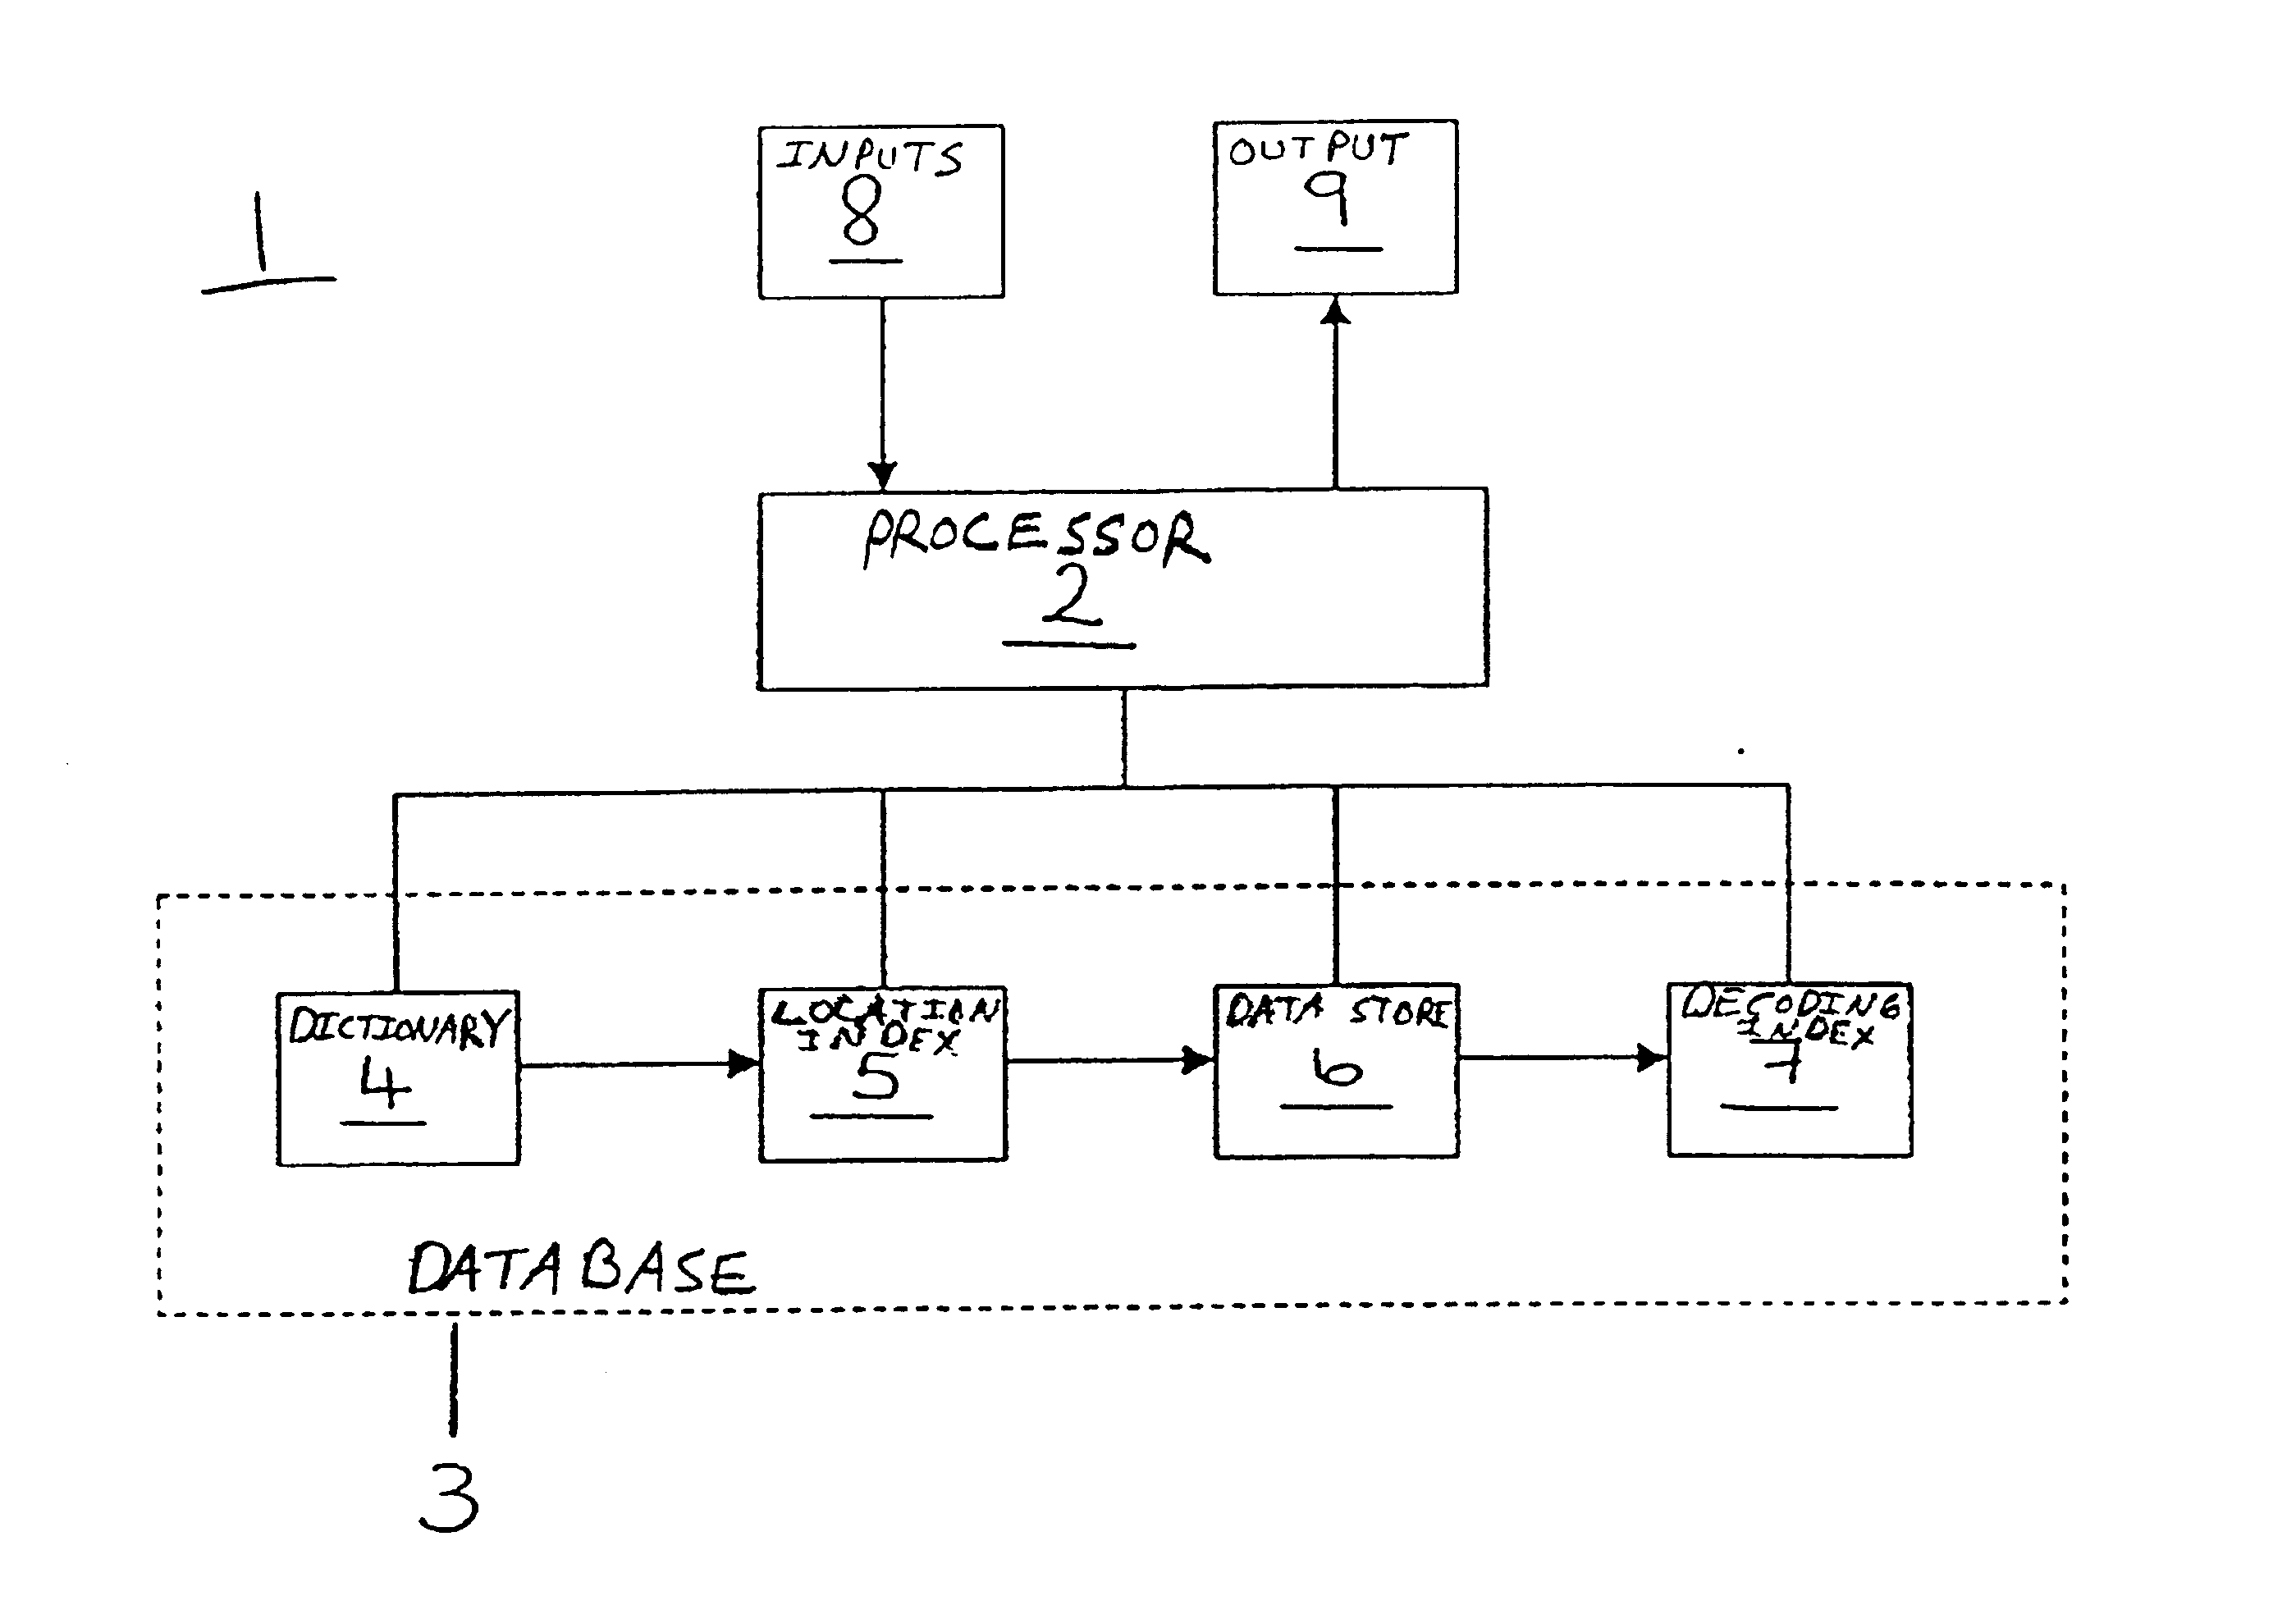 Method and apparatus for retrieving data representing a postal address from a plurality of postal addresses